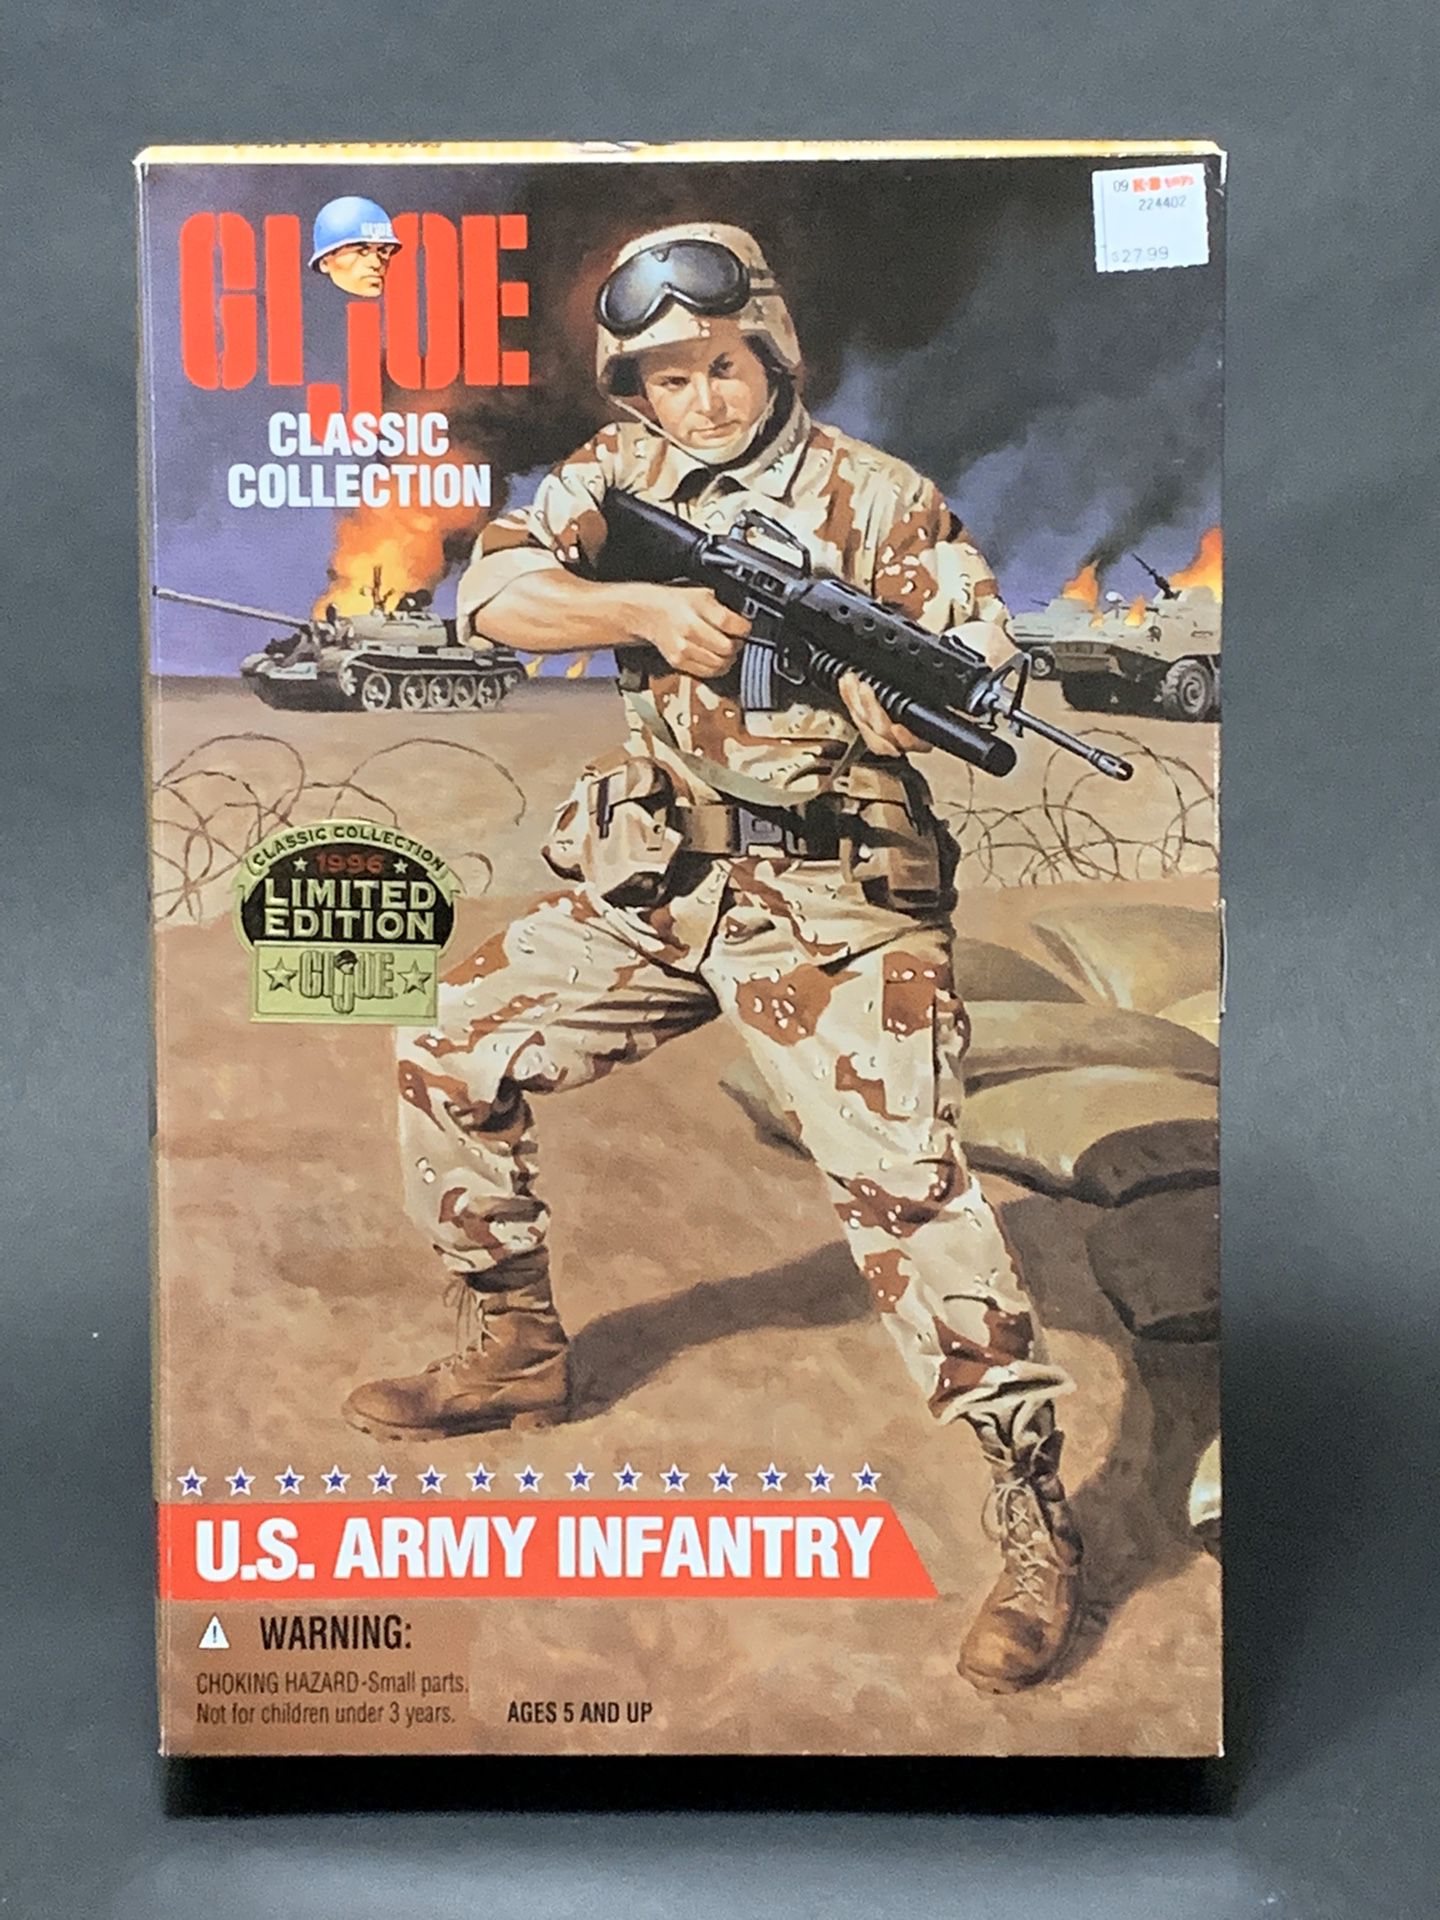 Hasbro GI Joe 12” Classic Collection 1996 Limited Edition U.S. Army Infantry Action Figure